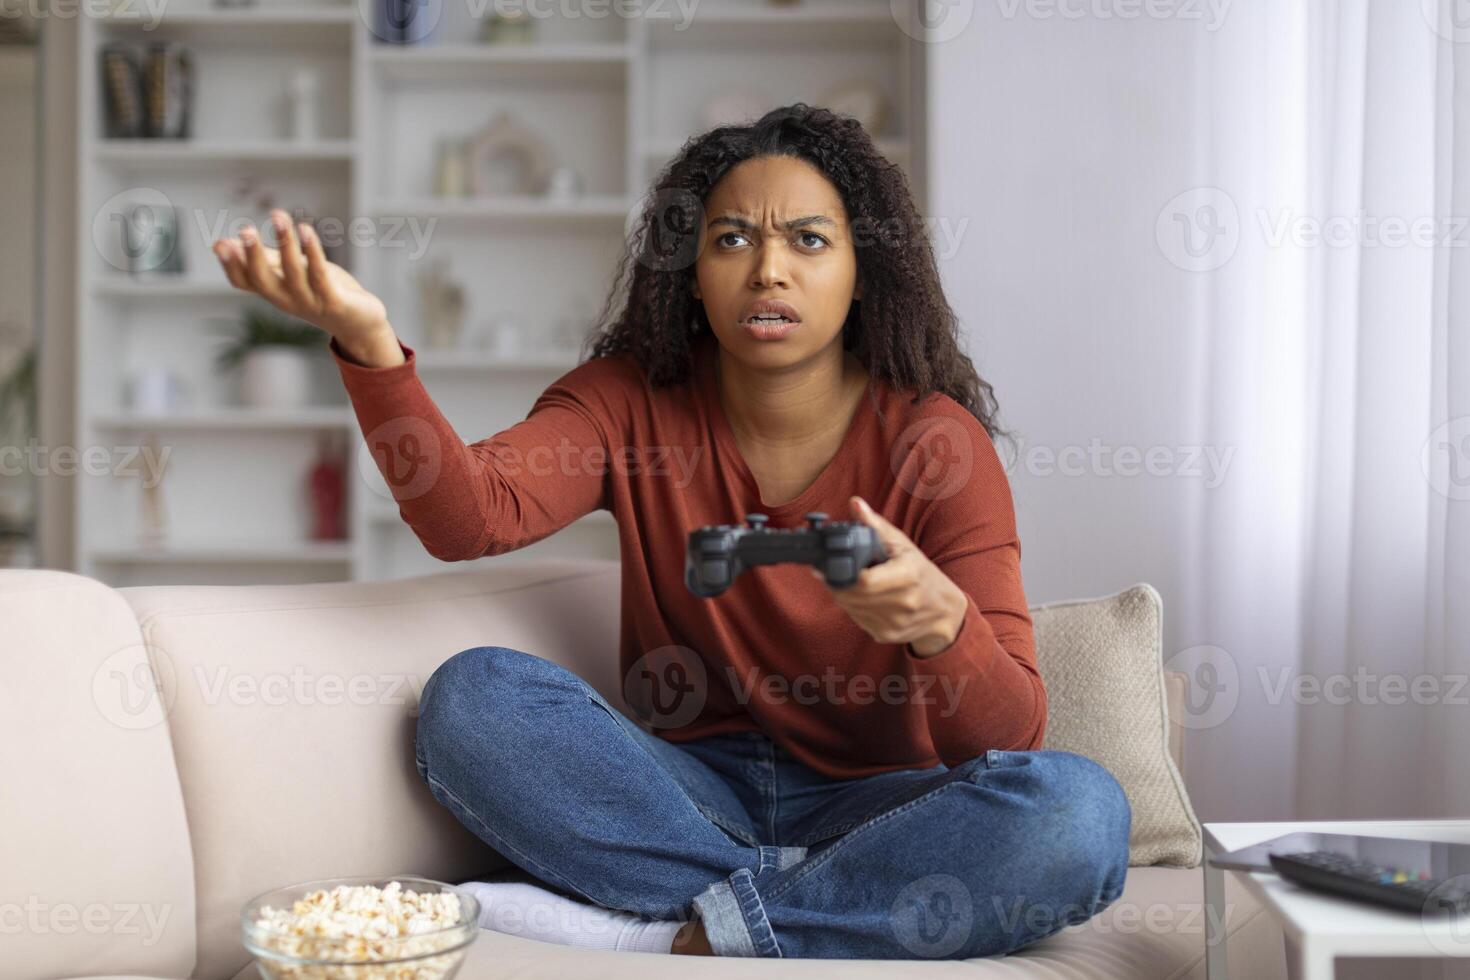 Stressed Black Woman With Joystick In Hand Sitting On Couch At Home photo